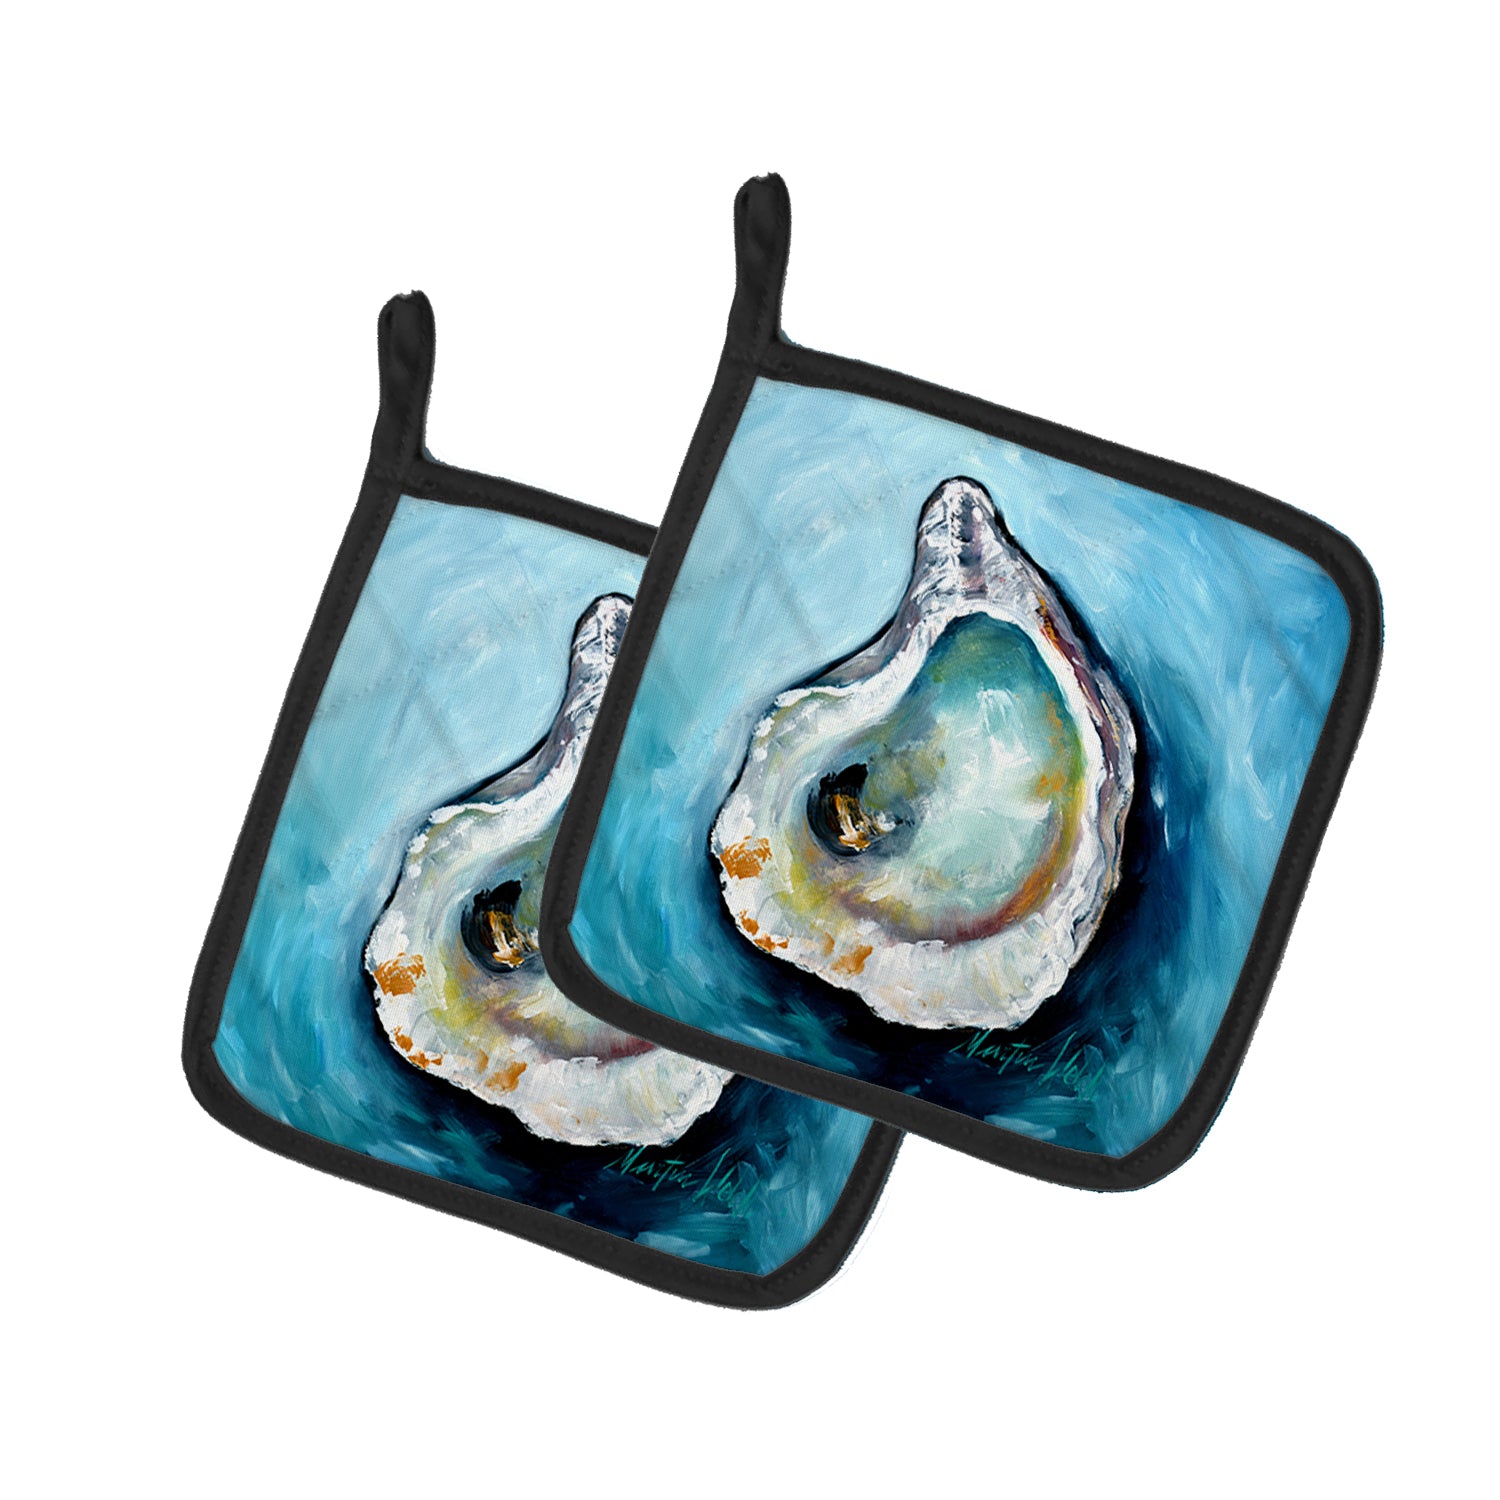 Buy this J Mac Oyster Pair of Pot Holders